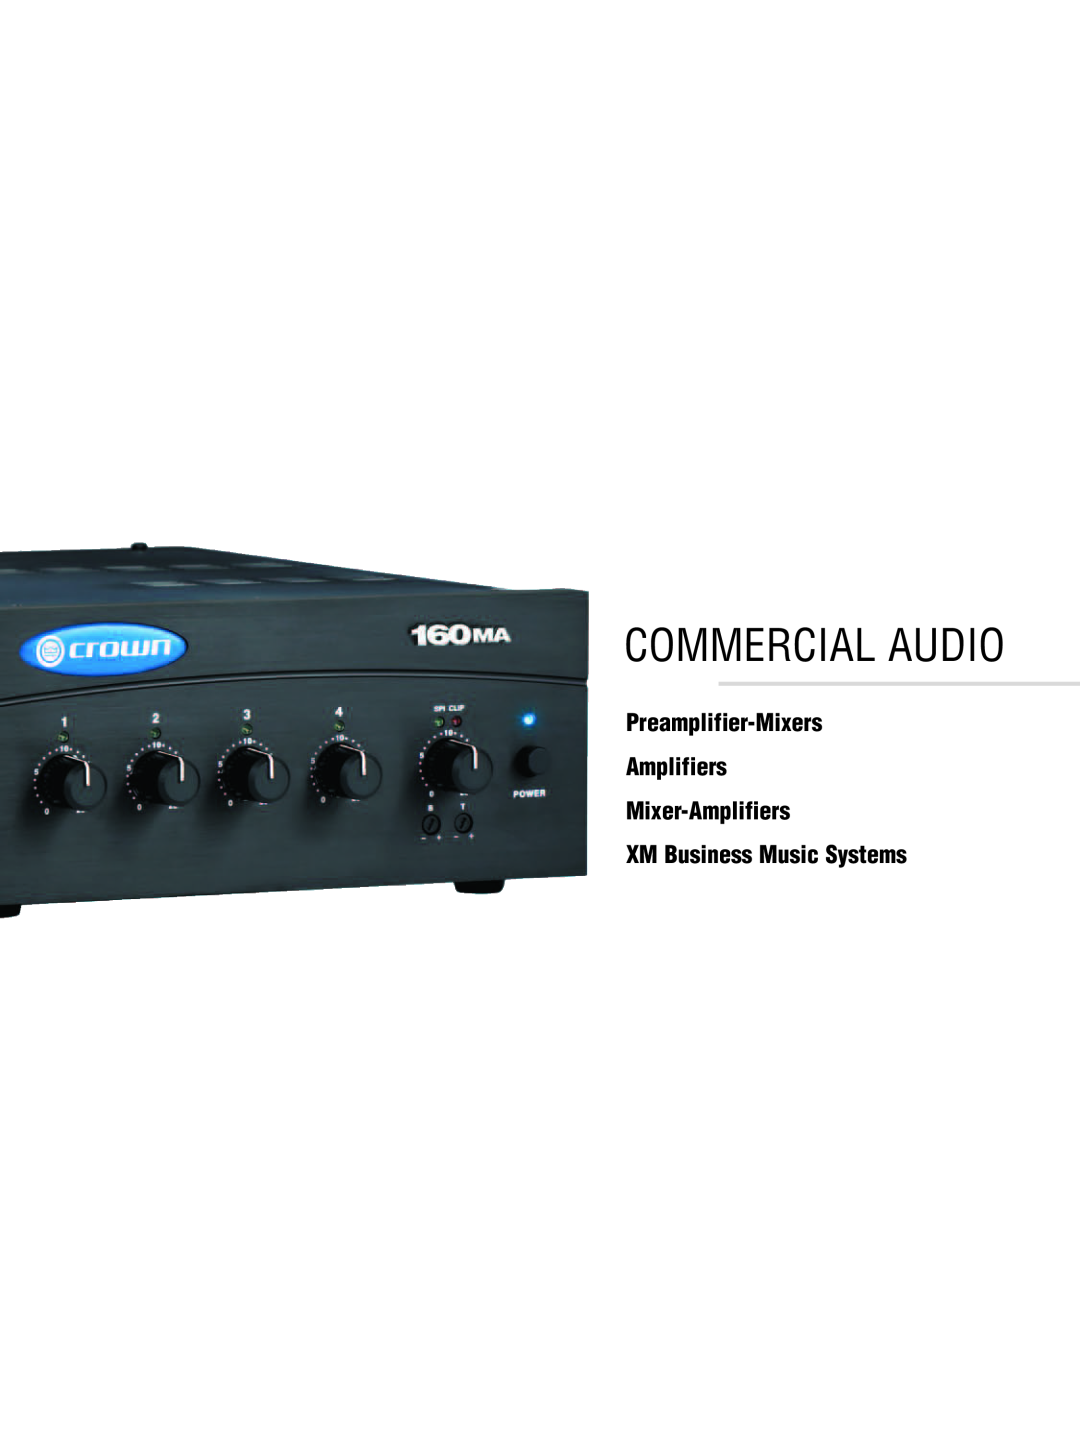 Crown CTS 600, CTS 3000 manual Commercial Audio, Preamplifier-Mixers Amplifiers Mixer-Amplifiers, XM Business Music Systems 